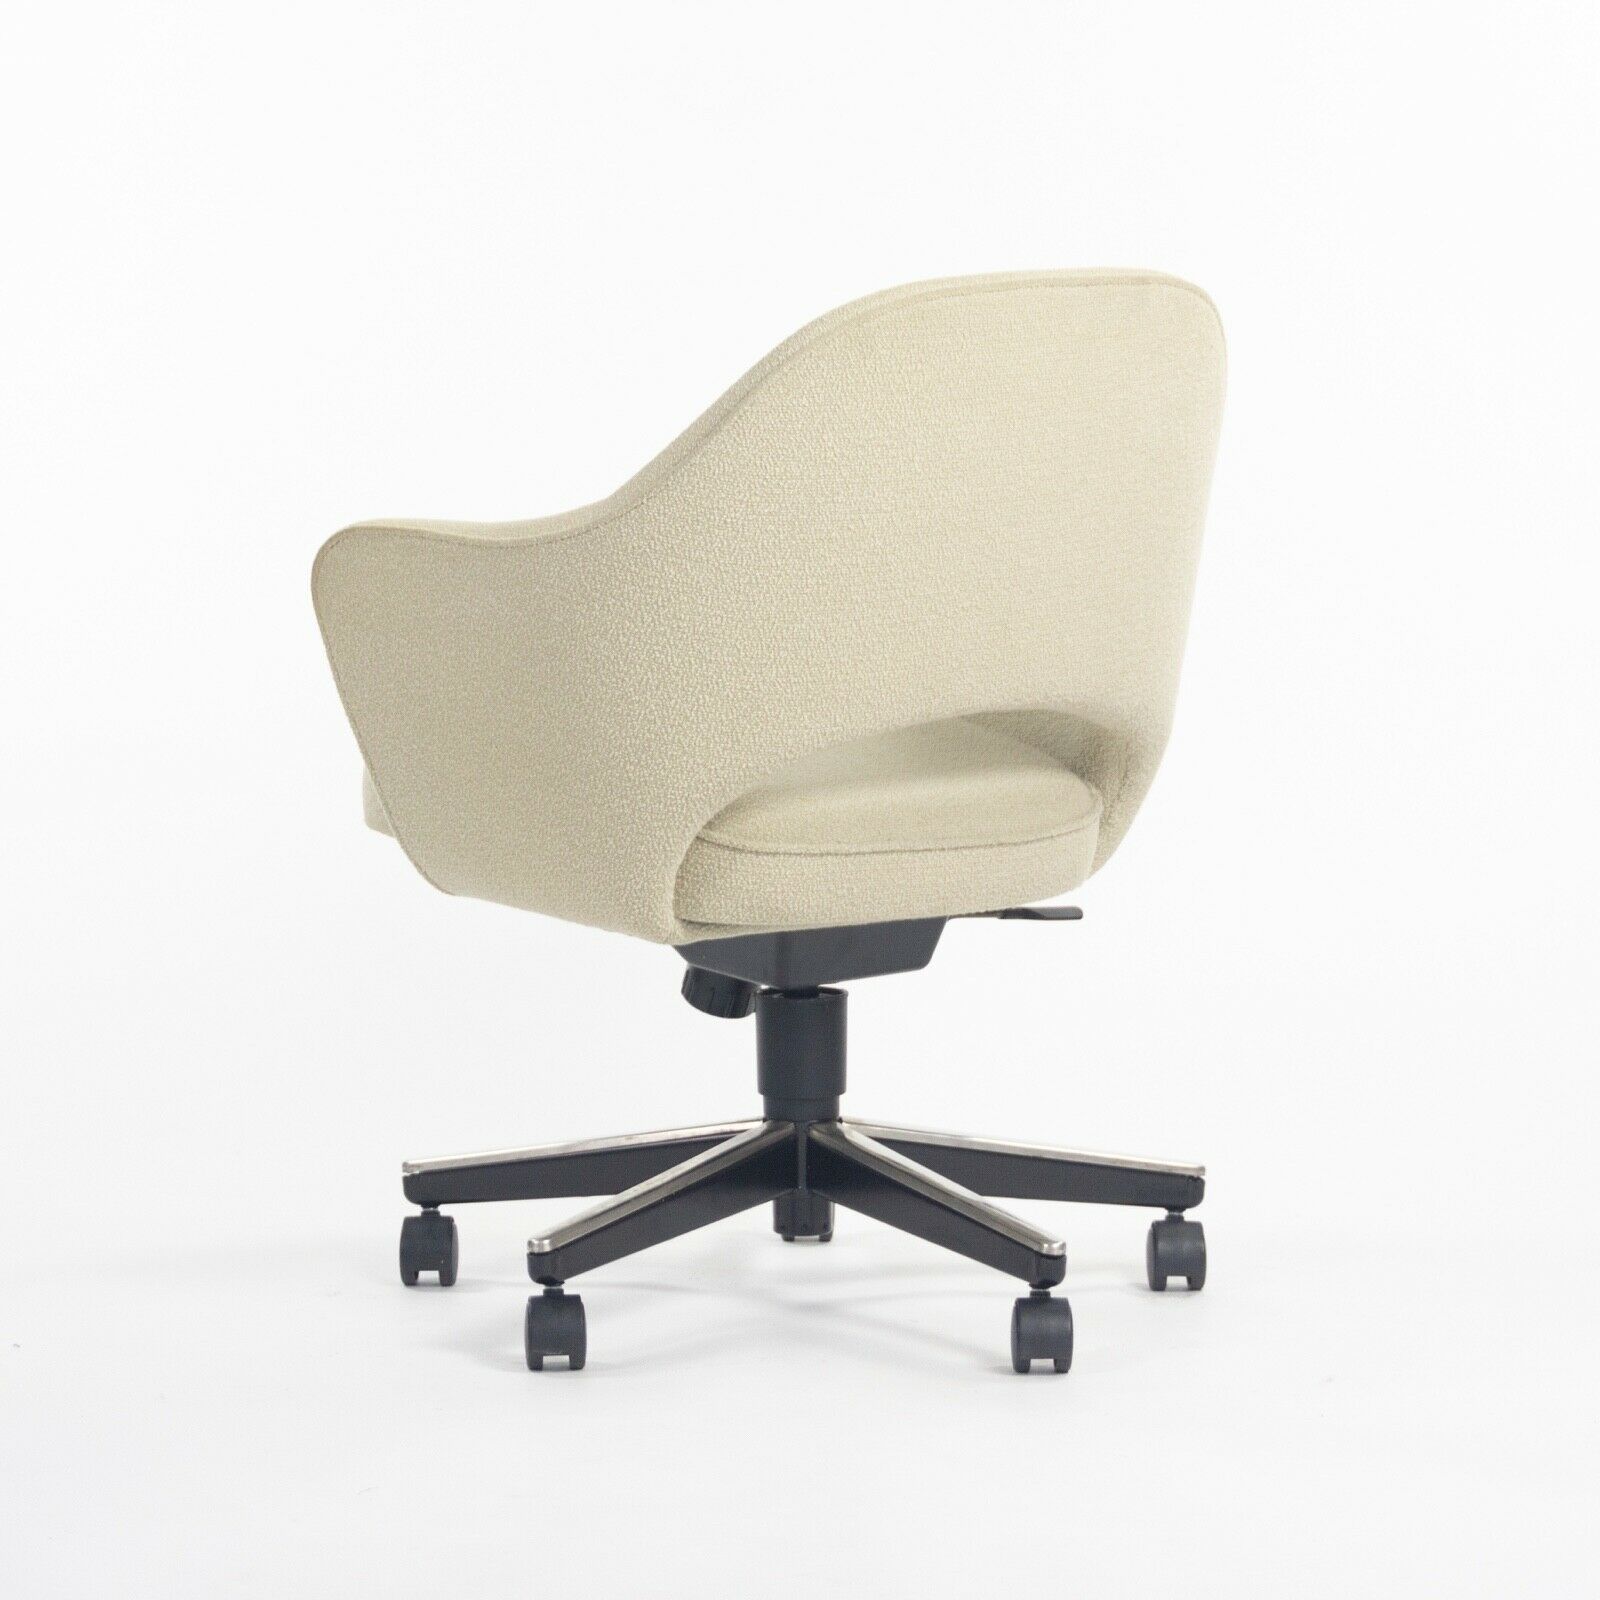 SOLD Eero Saarinen for Knoll Executive Arm Office Desk Chair Off White Boucle